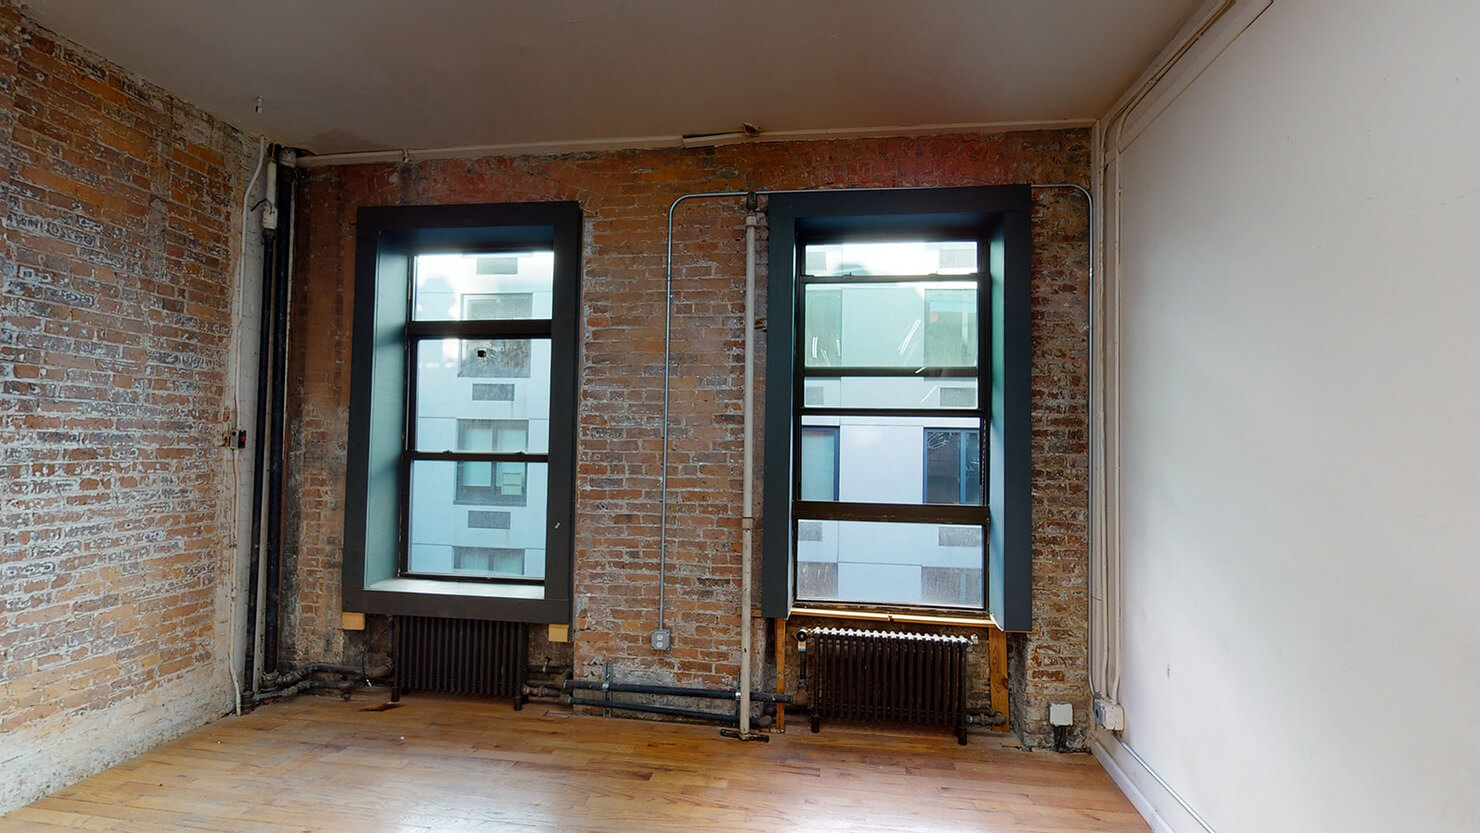 39 West 14th Street Office Space, Suite #407 - Windows